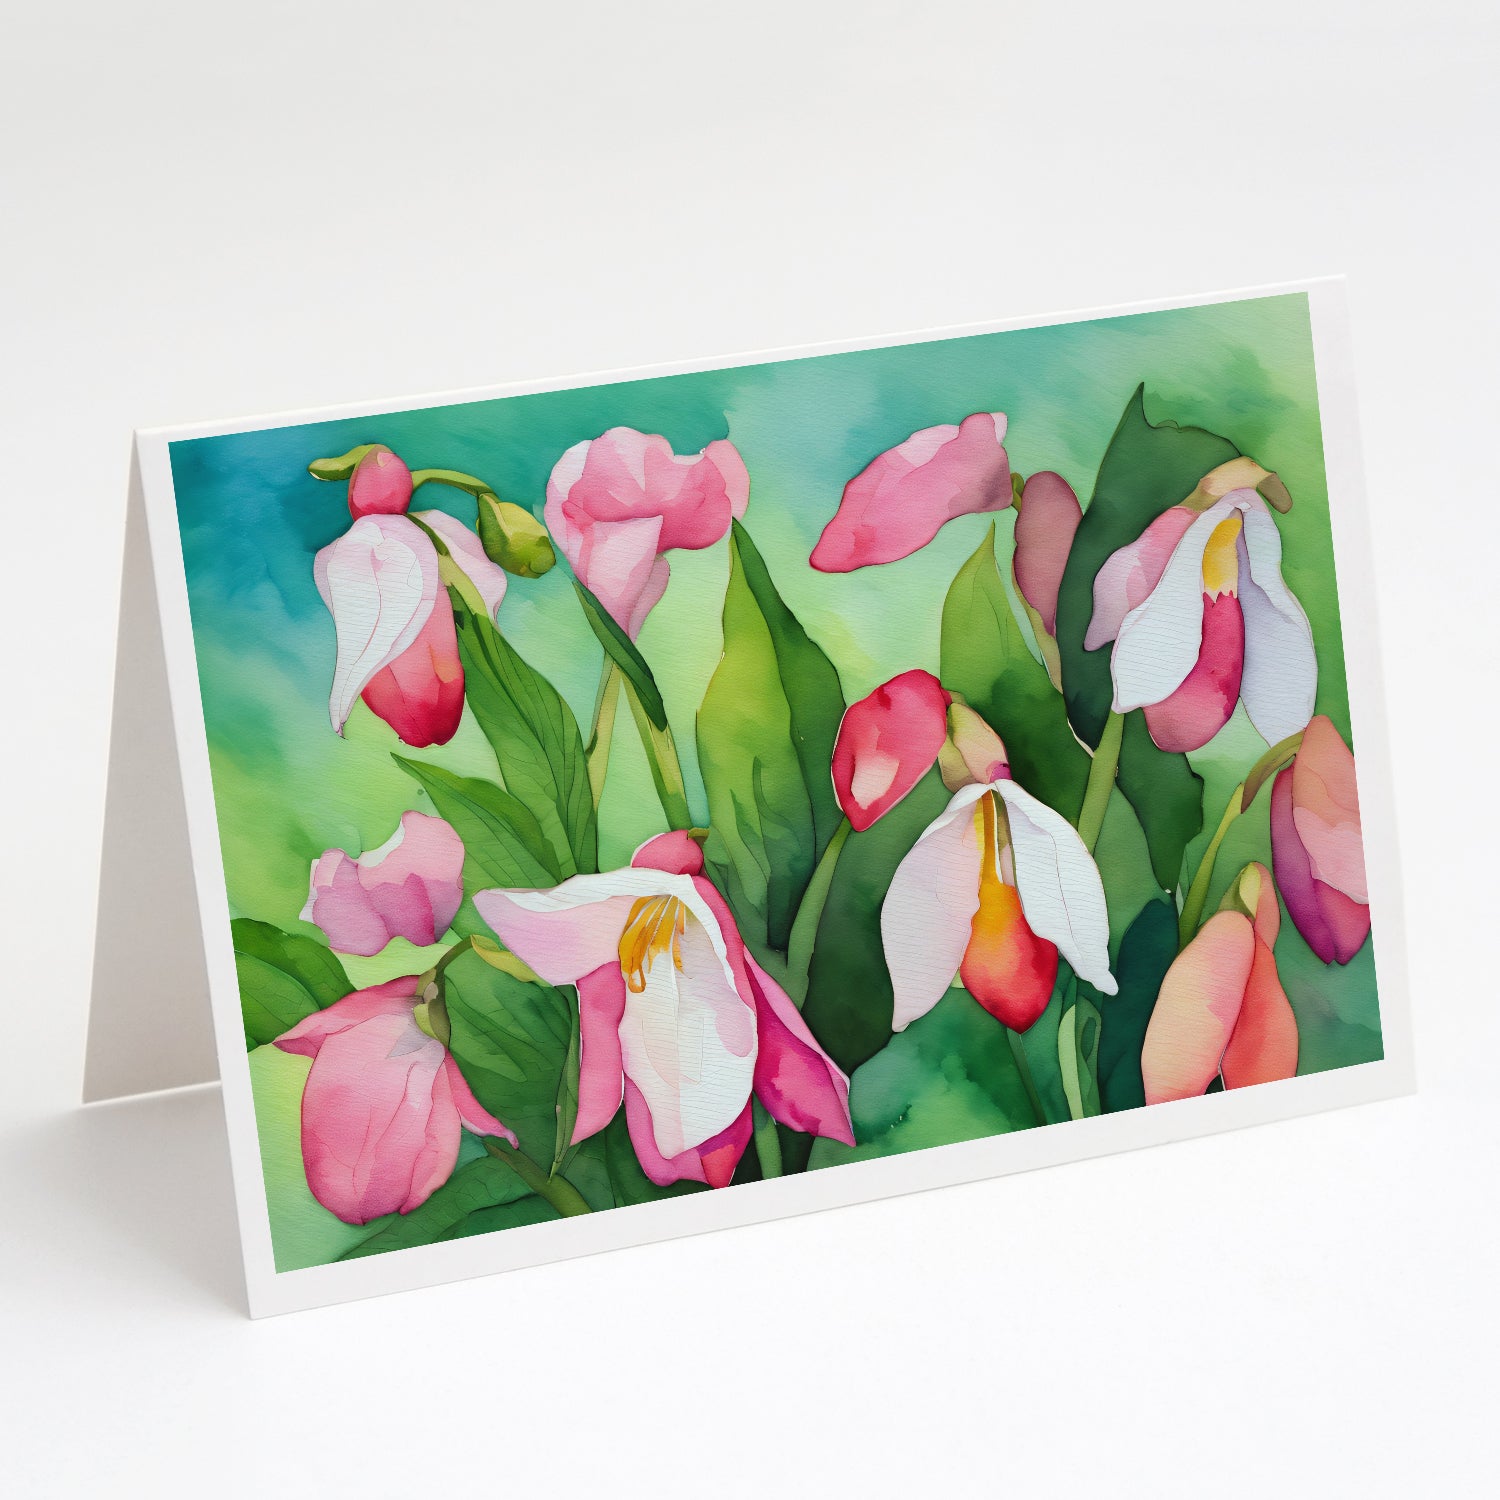 Buy this Minnesota Pink and White Lady’s Slippers in Watercolor Greeting Cards and Envelopes Pack of 8